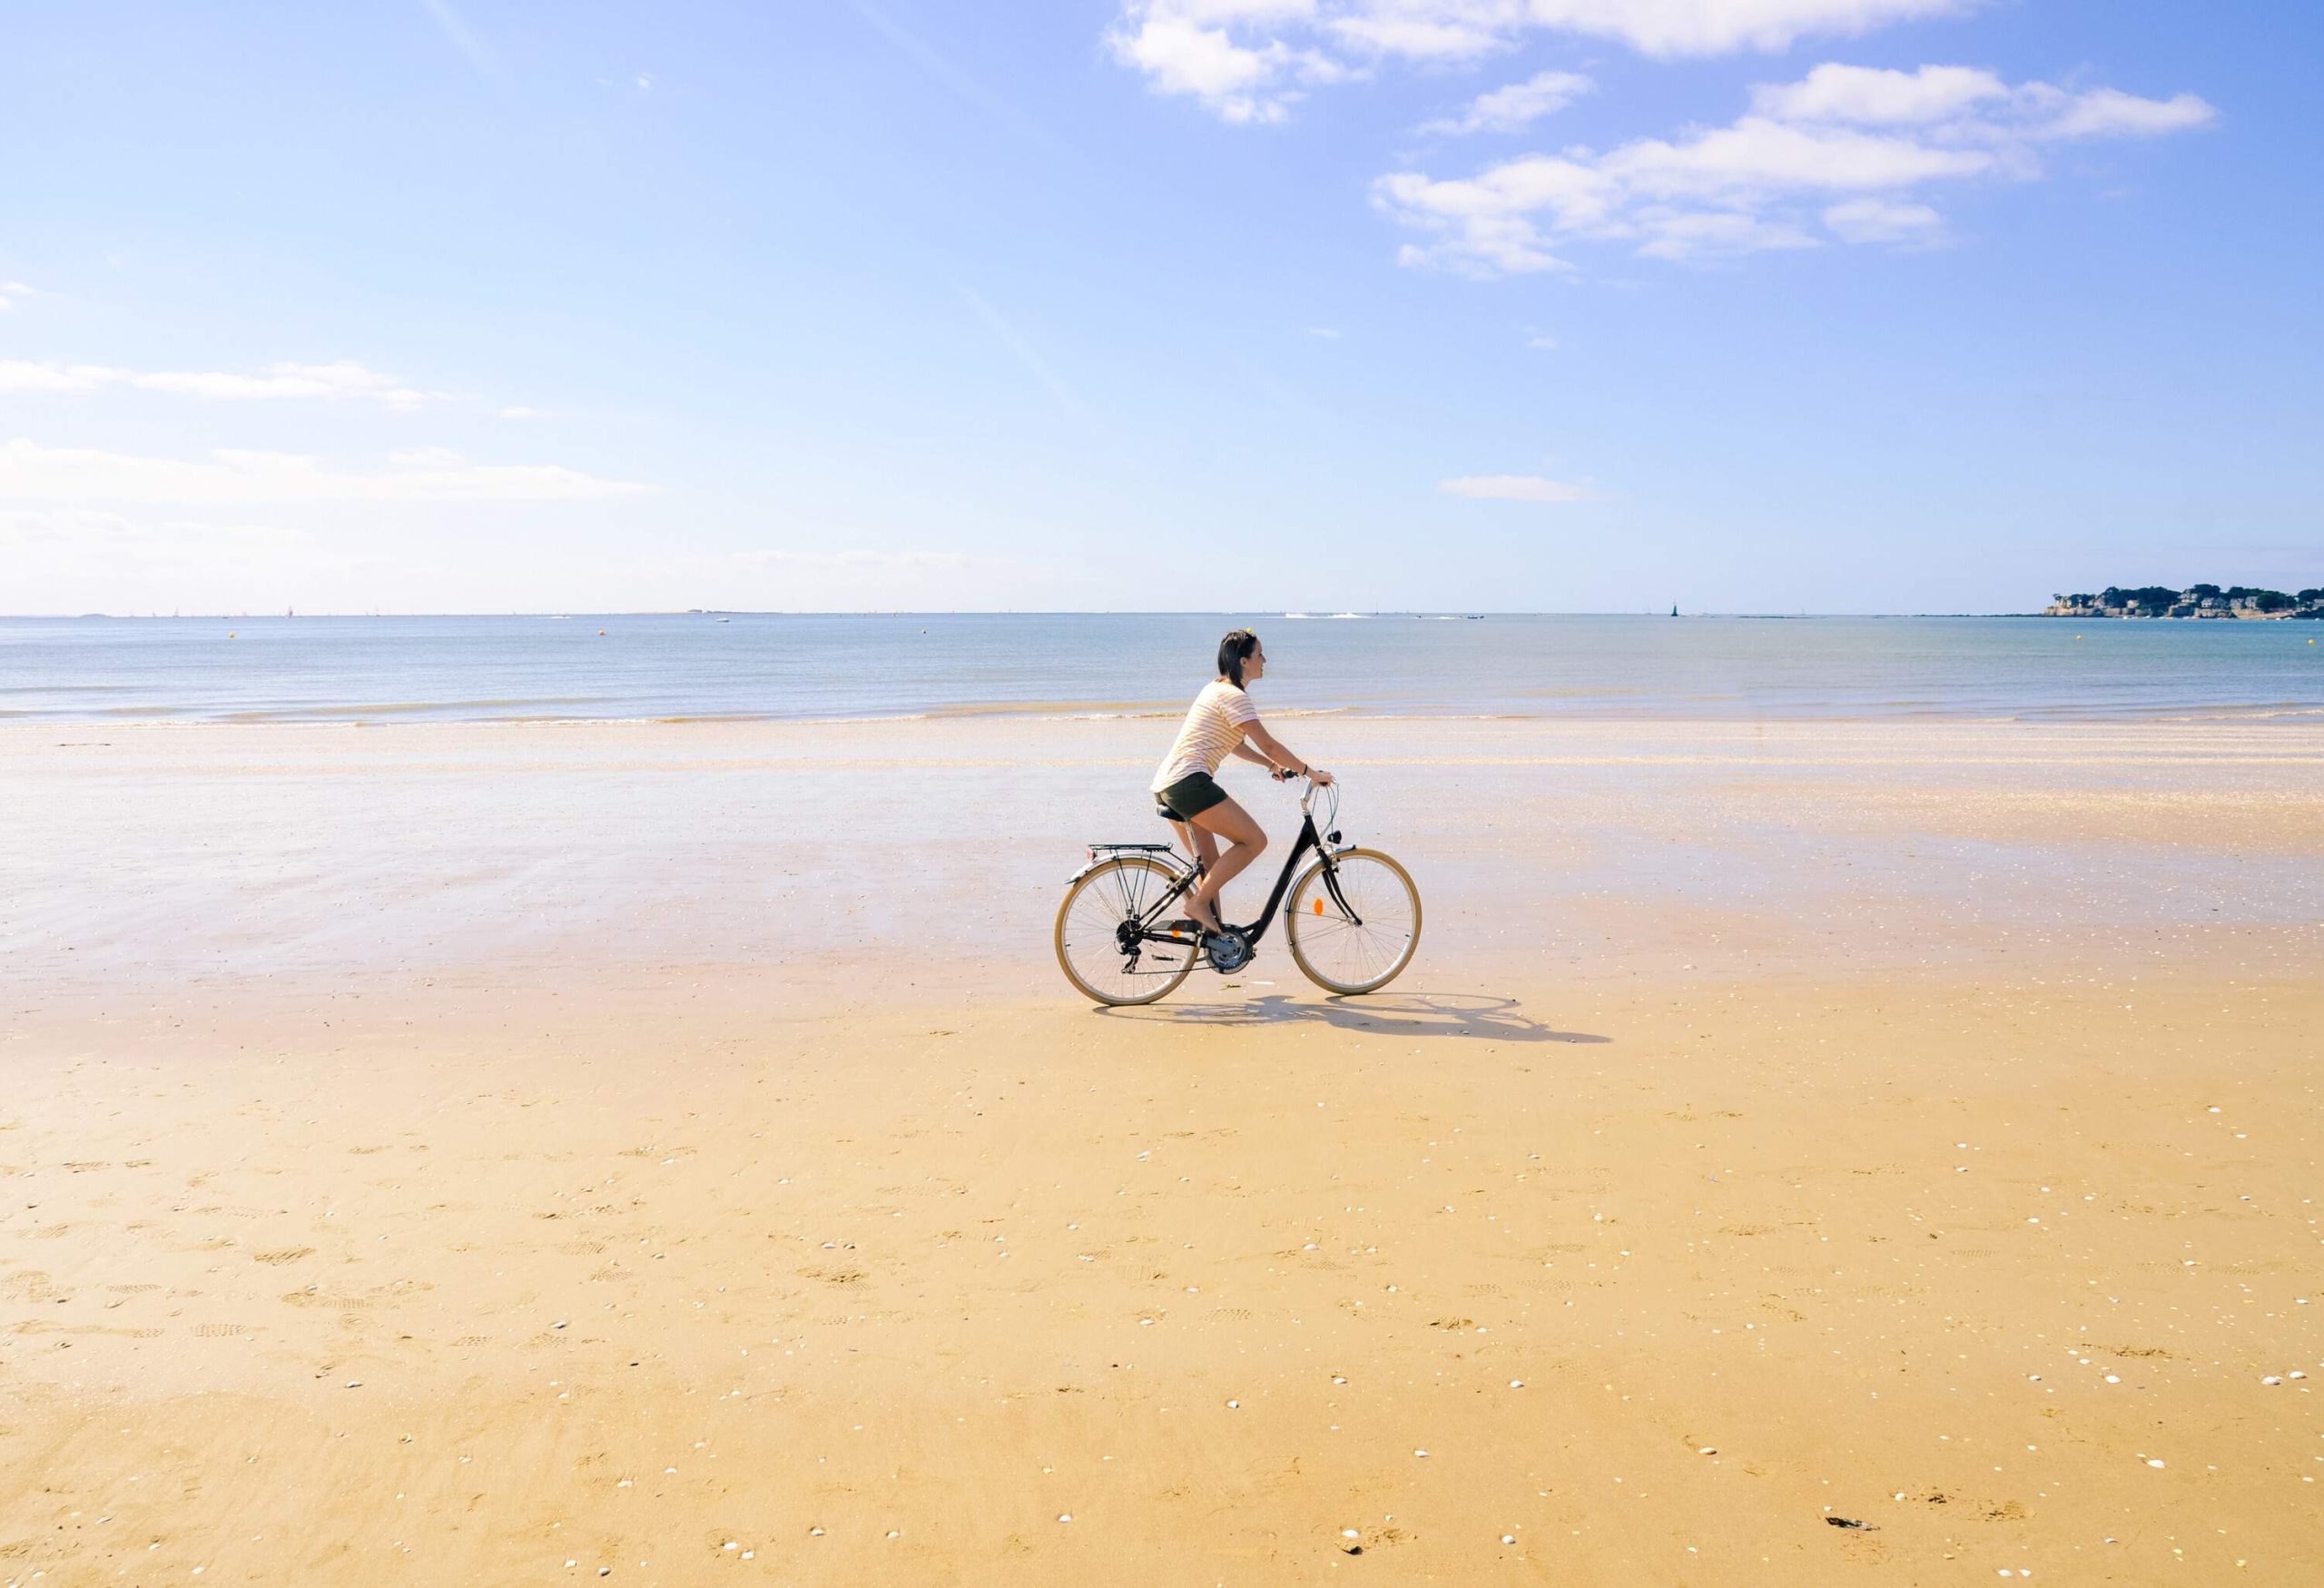 A girl is riding a bike on golden sand with a view of the calm ocean in the background.